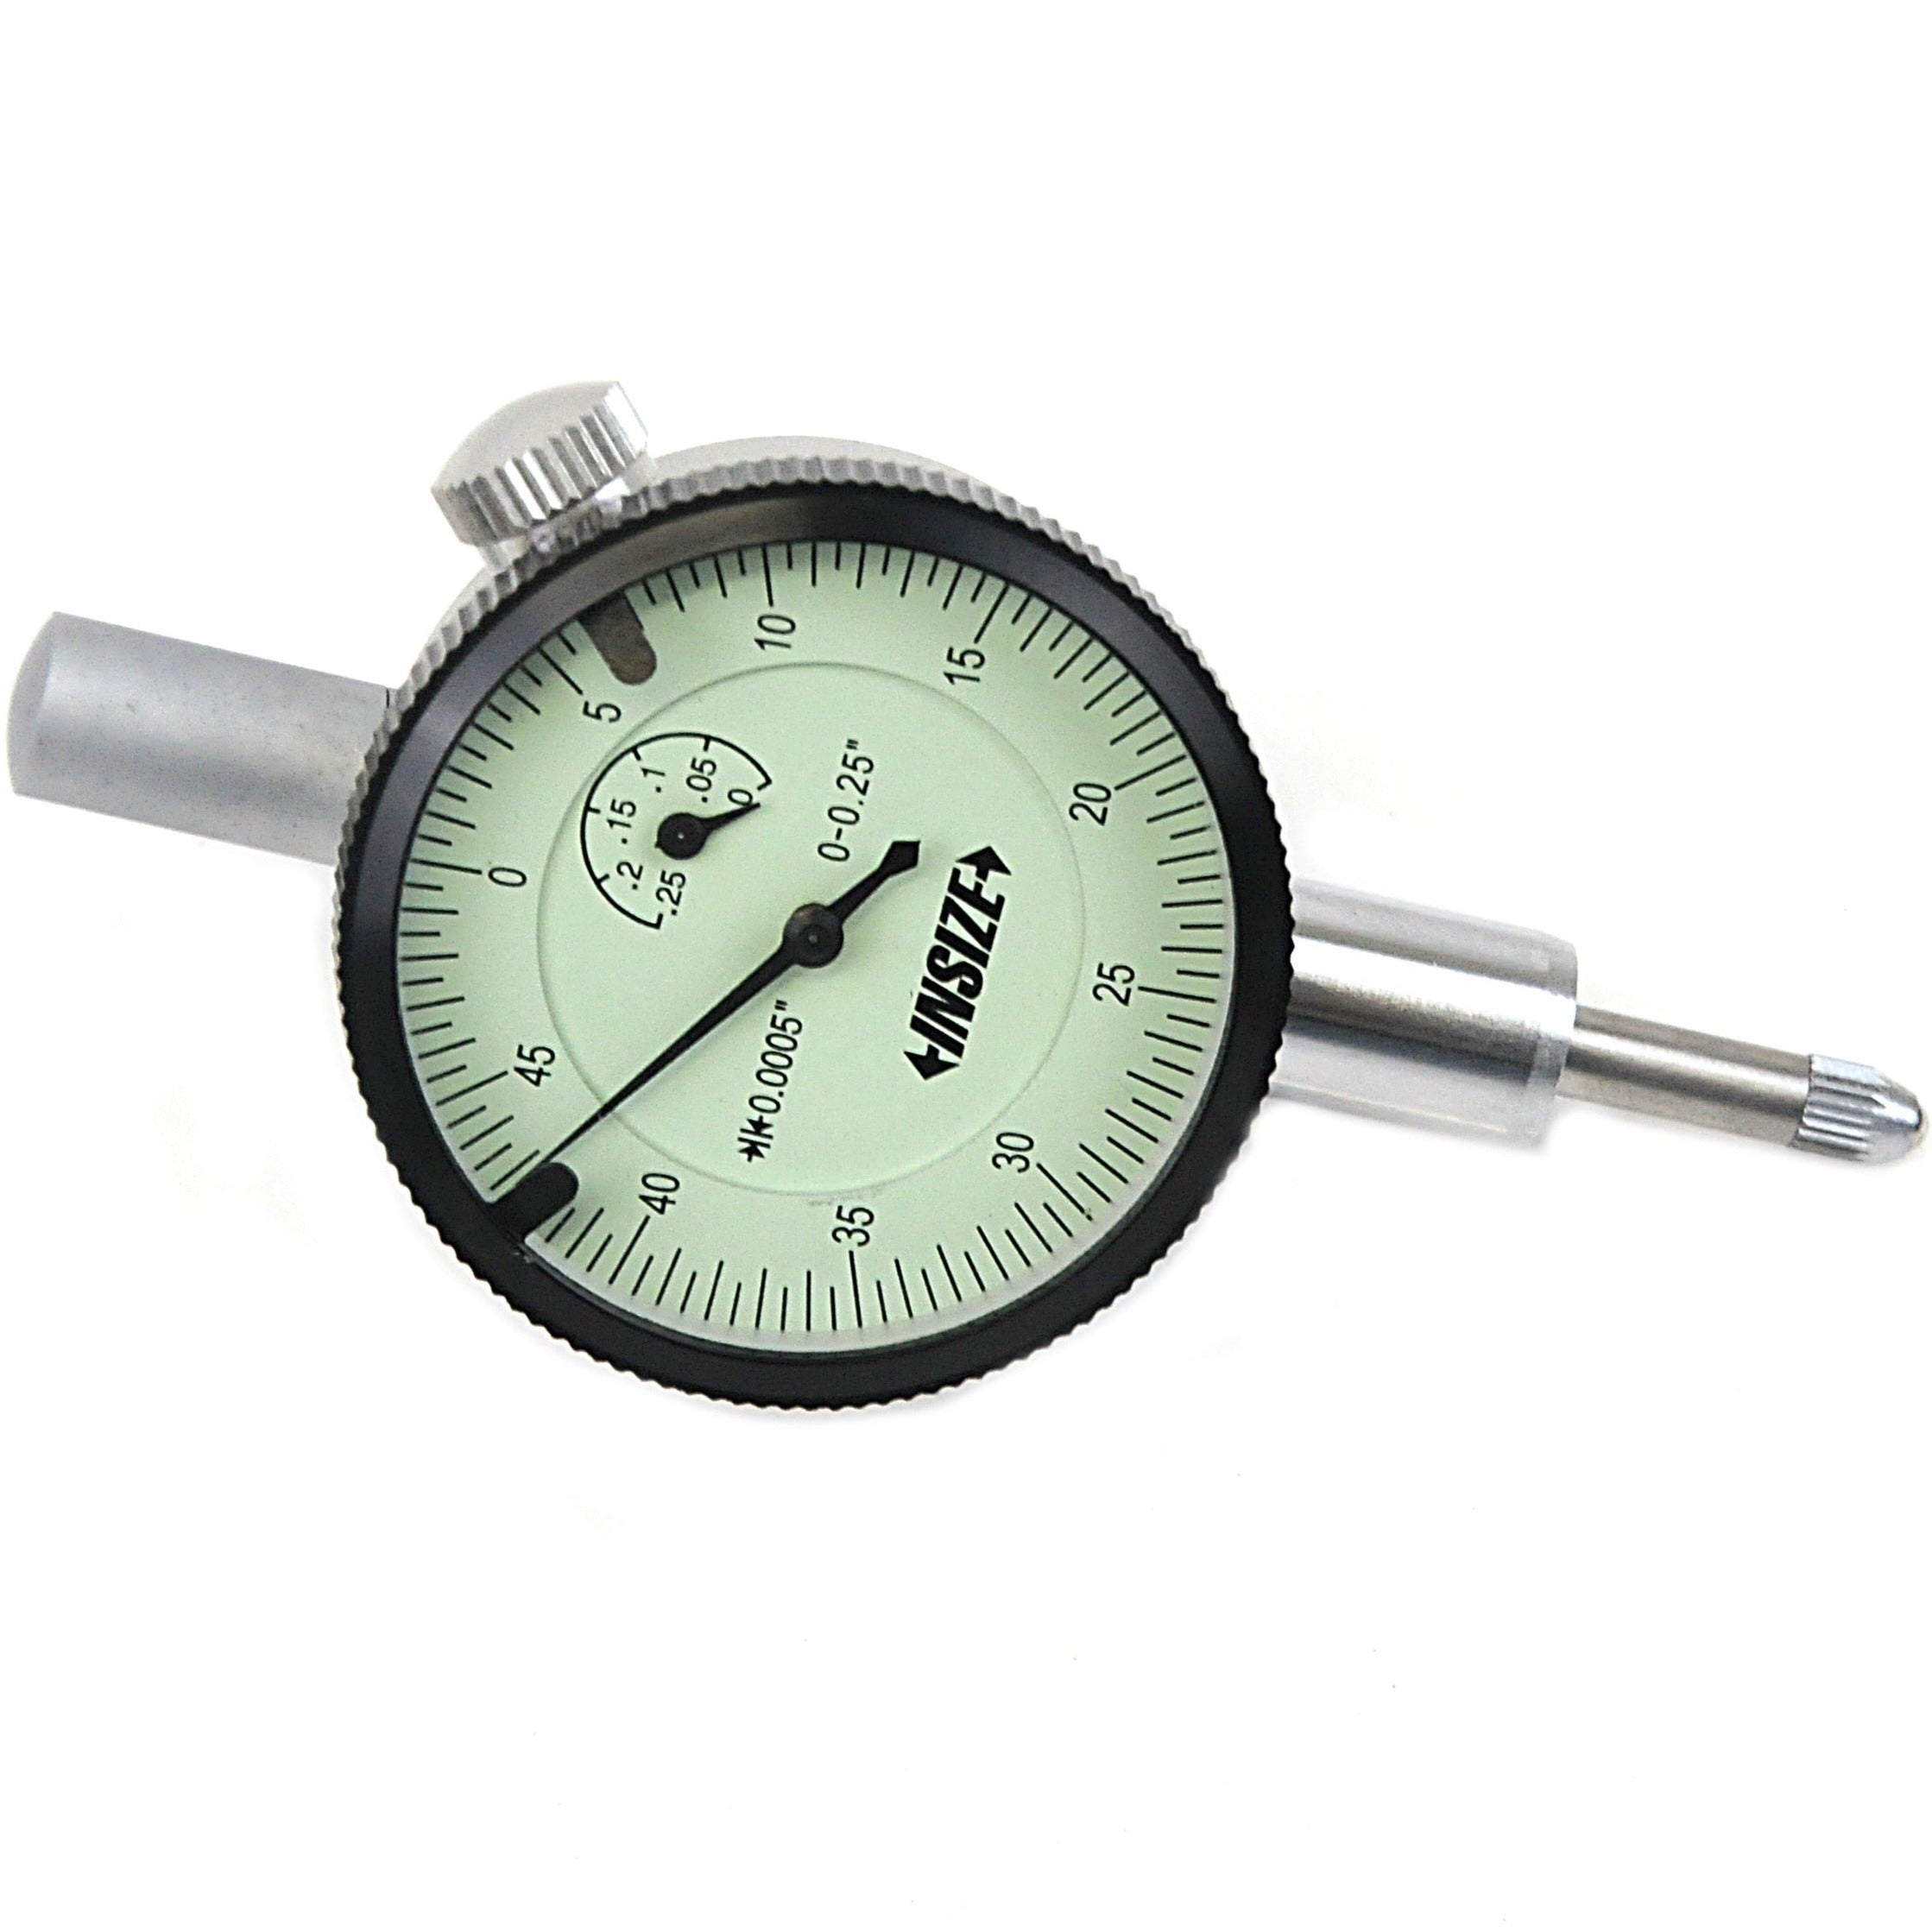 Insize Imperial Compact Dial Indicator 0.25" 2304-0255